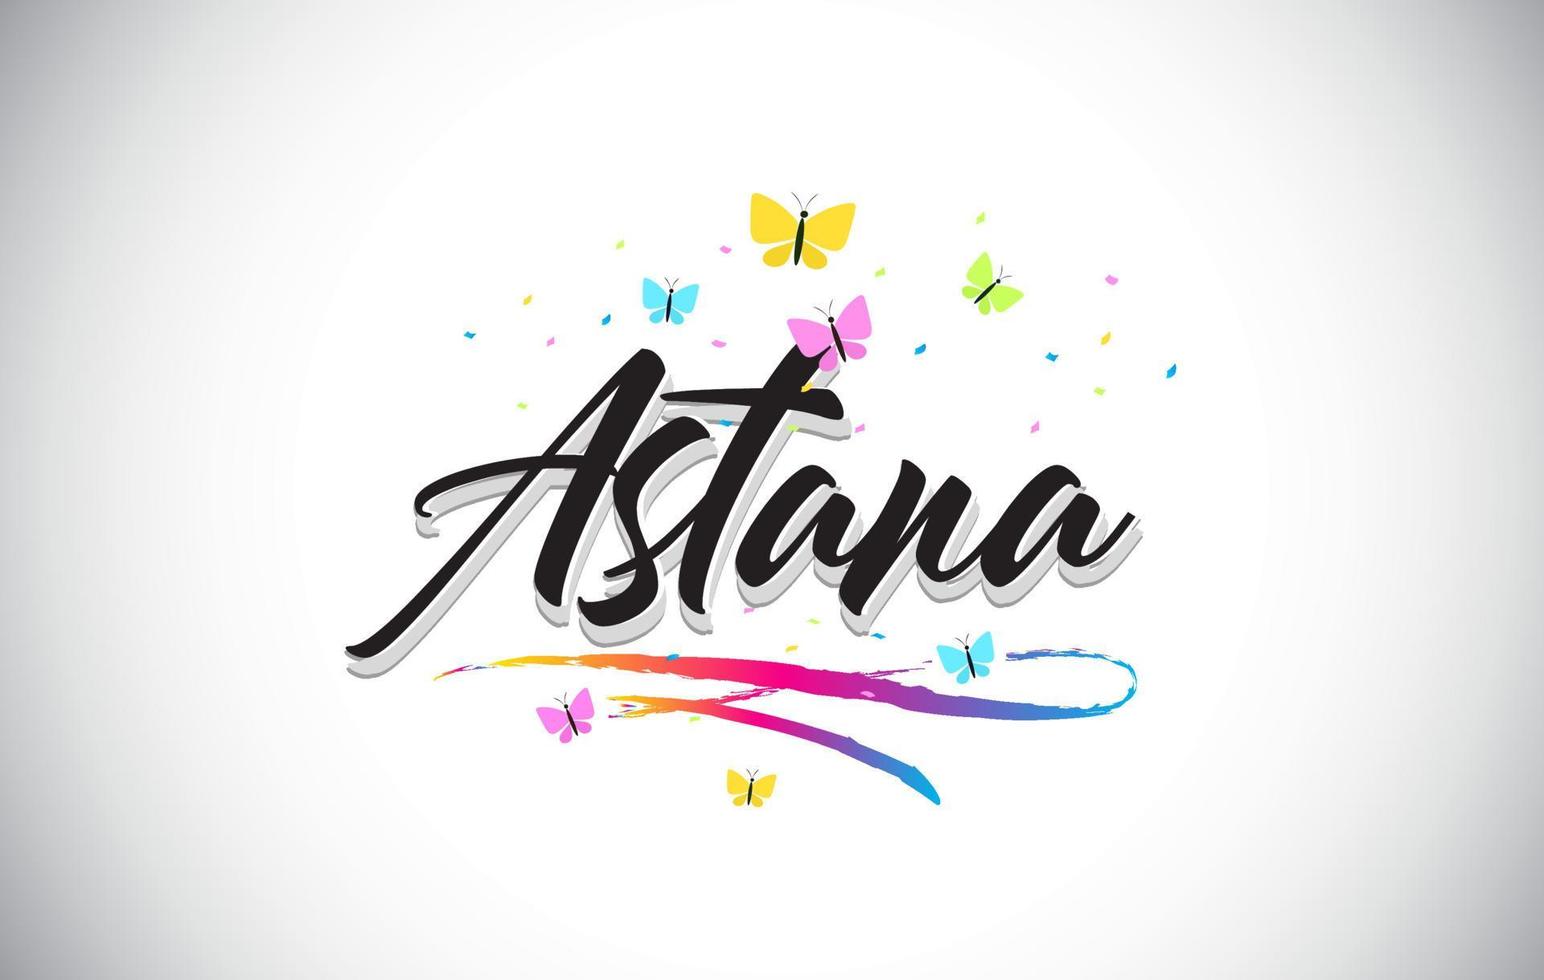 Astana Handwritten Vector Word Text with Butterflies and Colorful Swoosh.